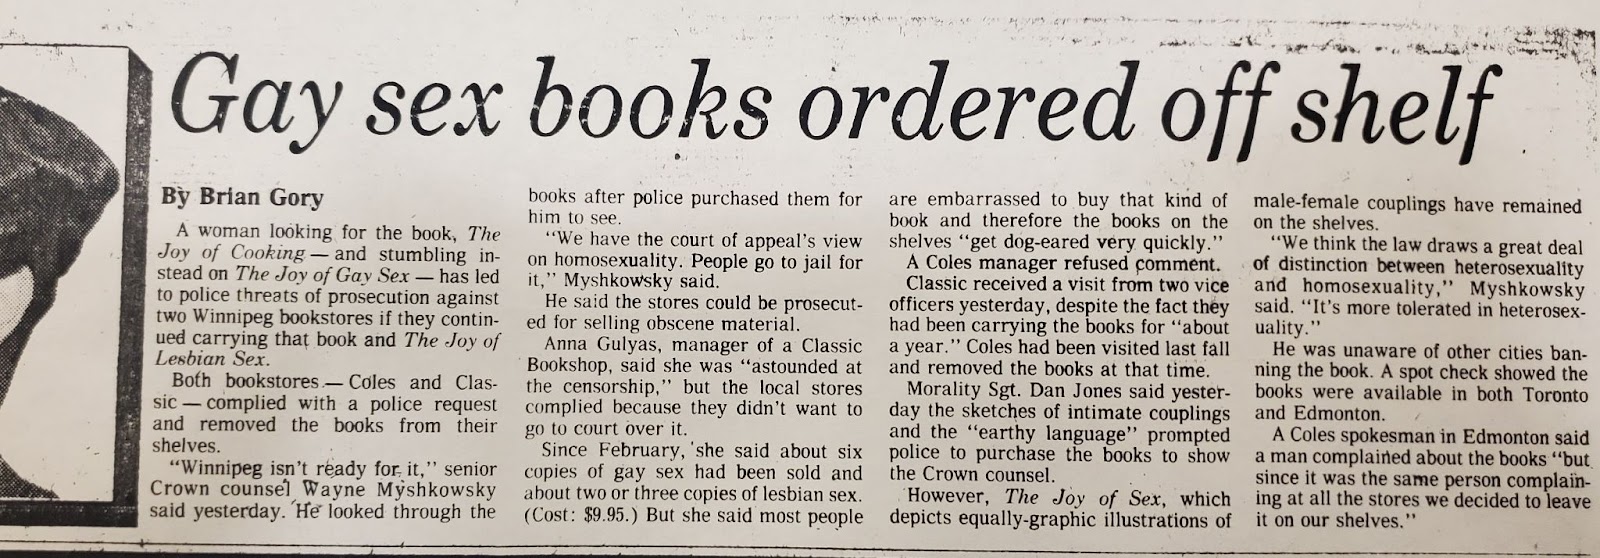 Newspaper article with a title that reads “gay sex books ordered off shelf.”